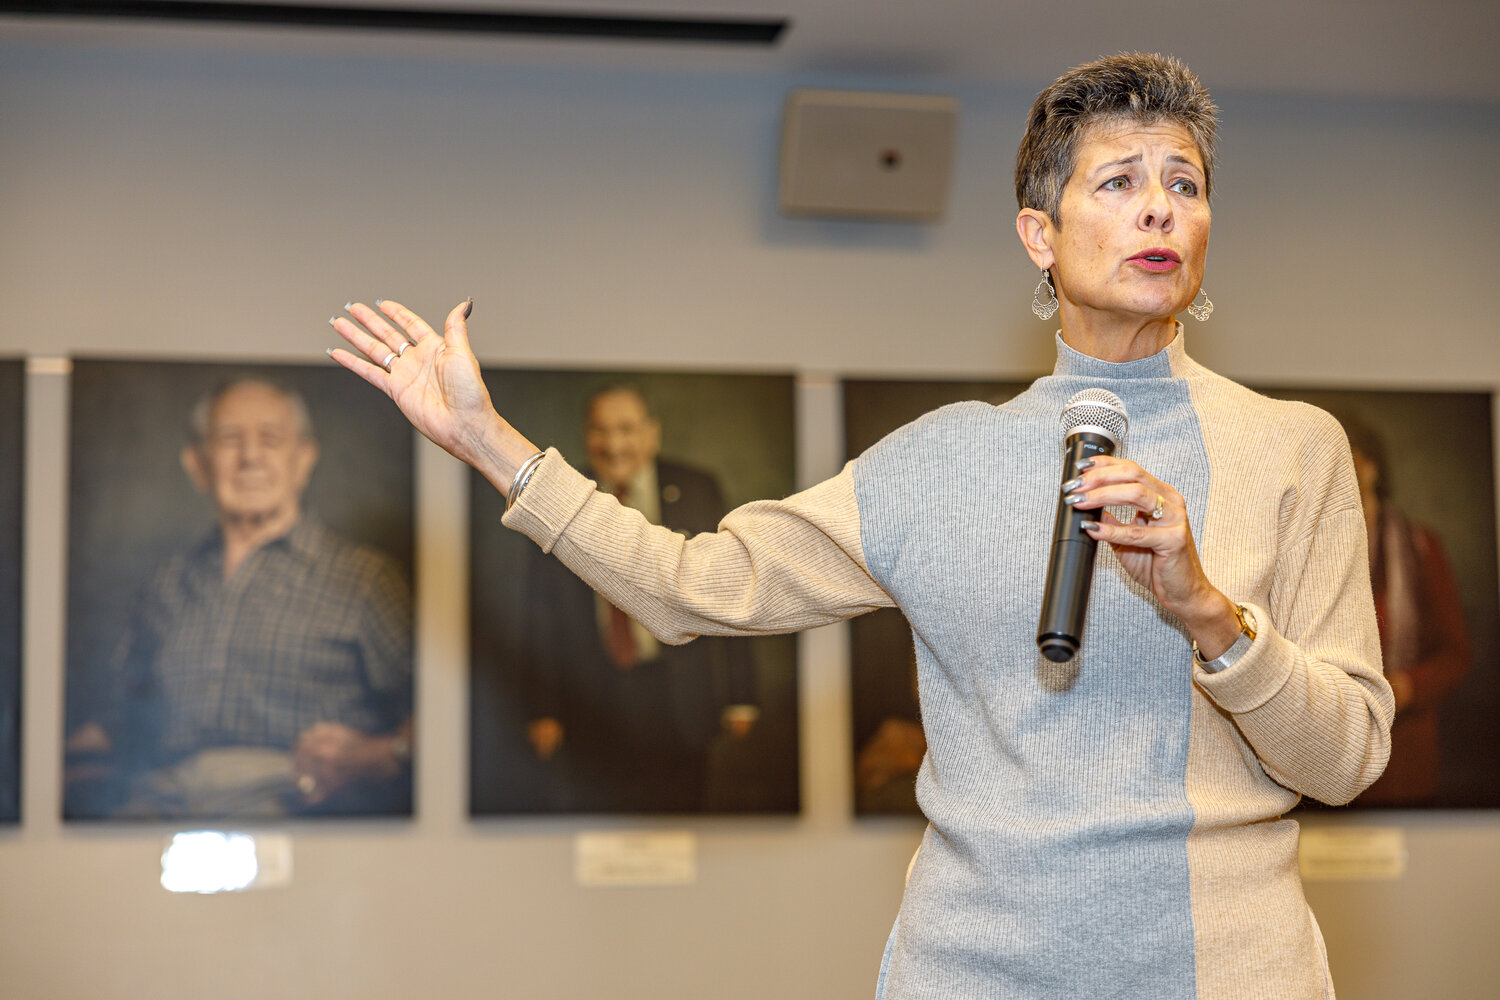 Donna Rosenblum, president of the Merrick Library board and an educator at the Holocaust Memorial & Tolerance Center of Nassau County, in Glen Cove, tells the stories of the survivors.